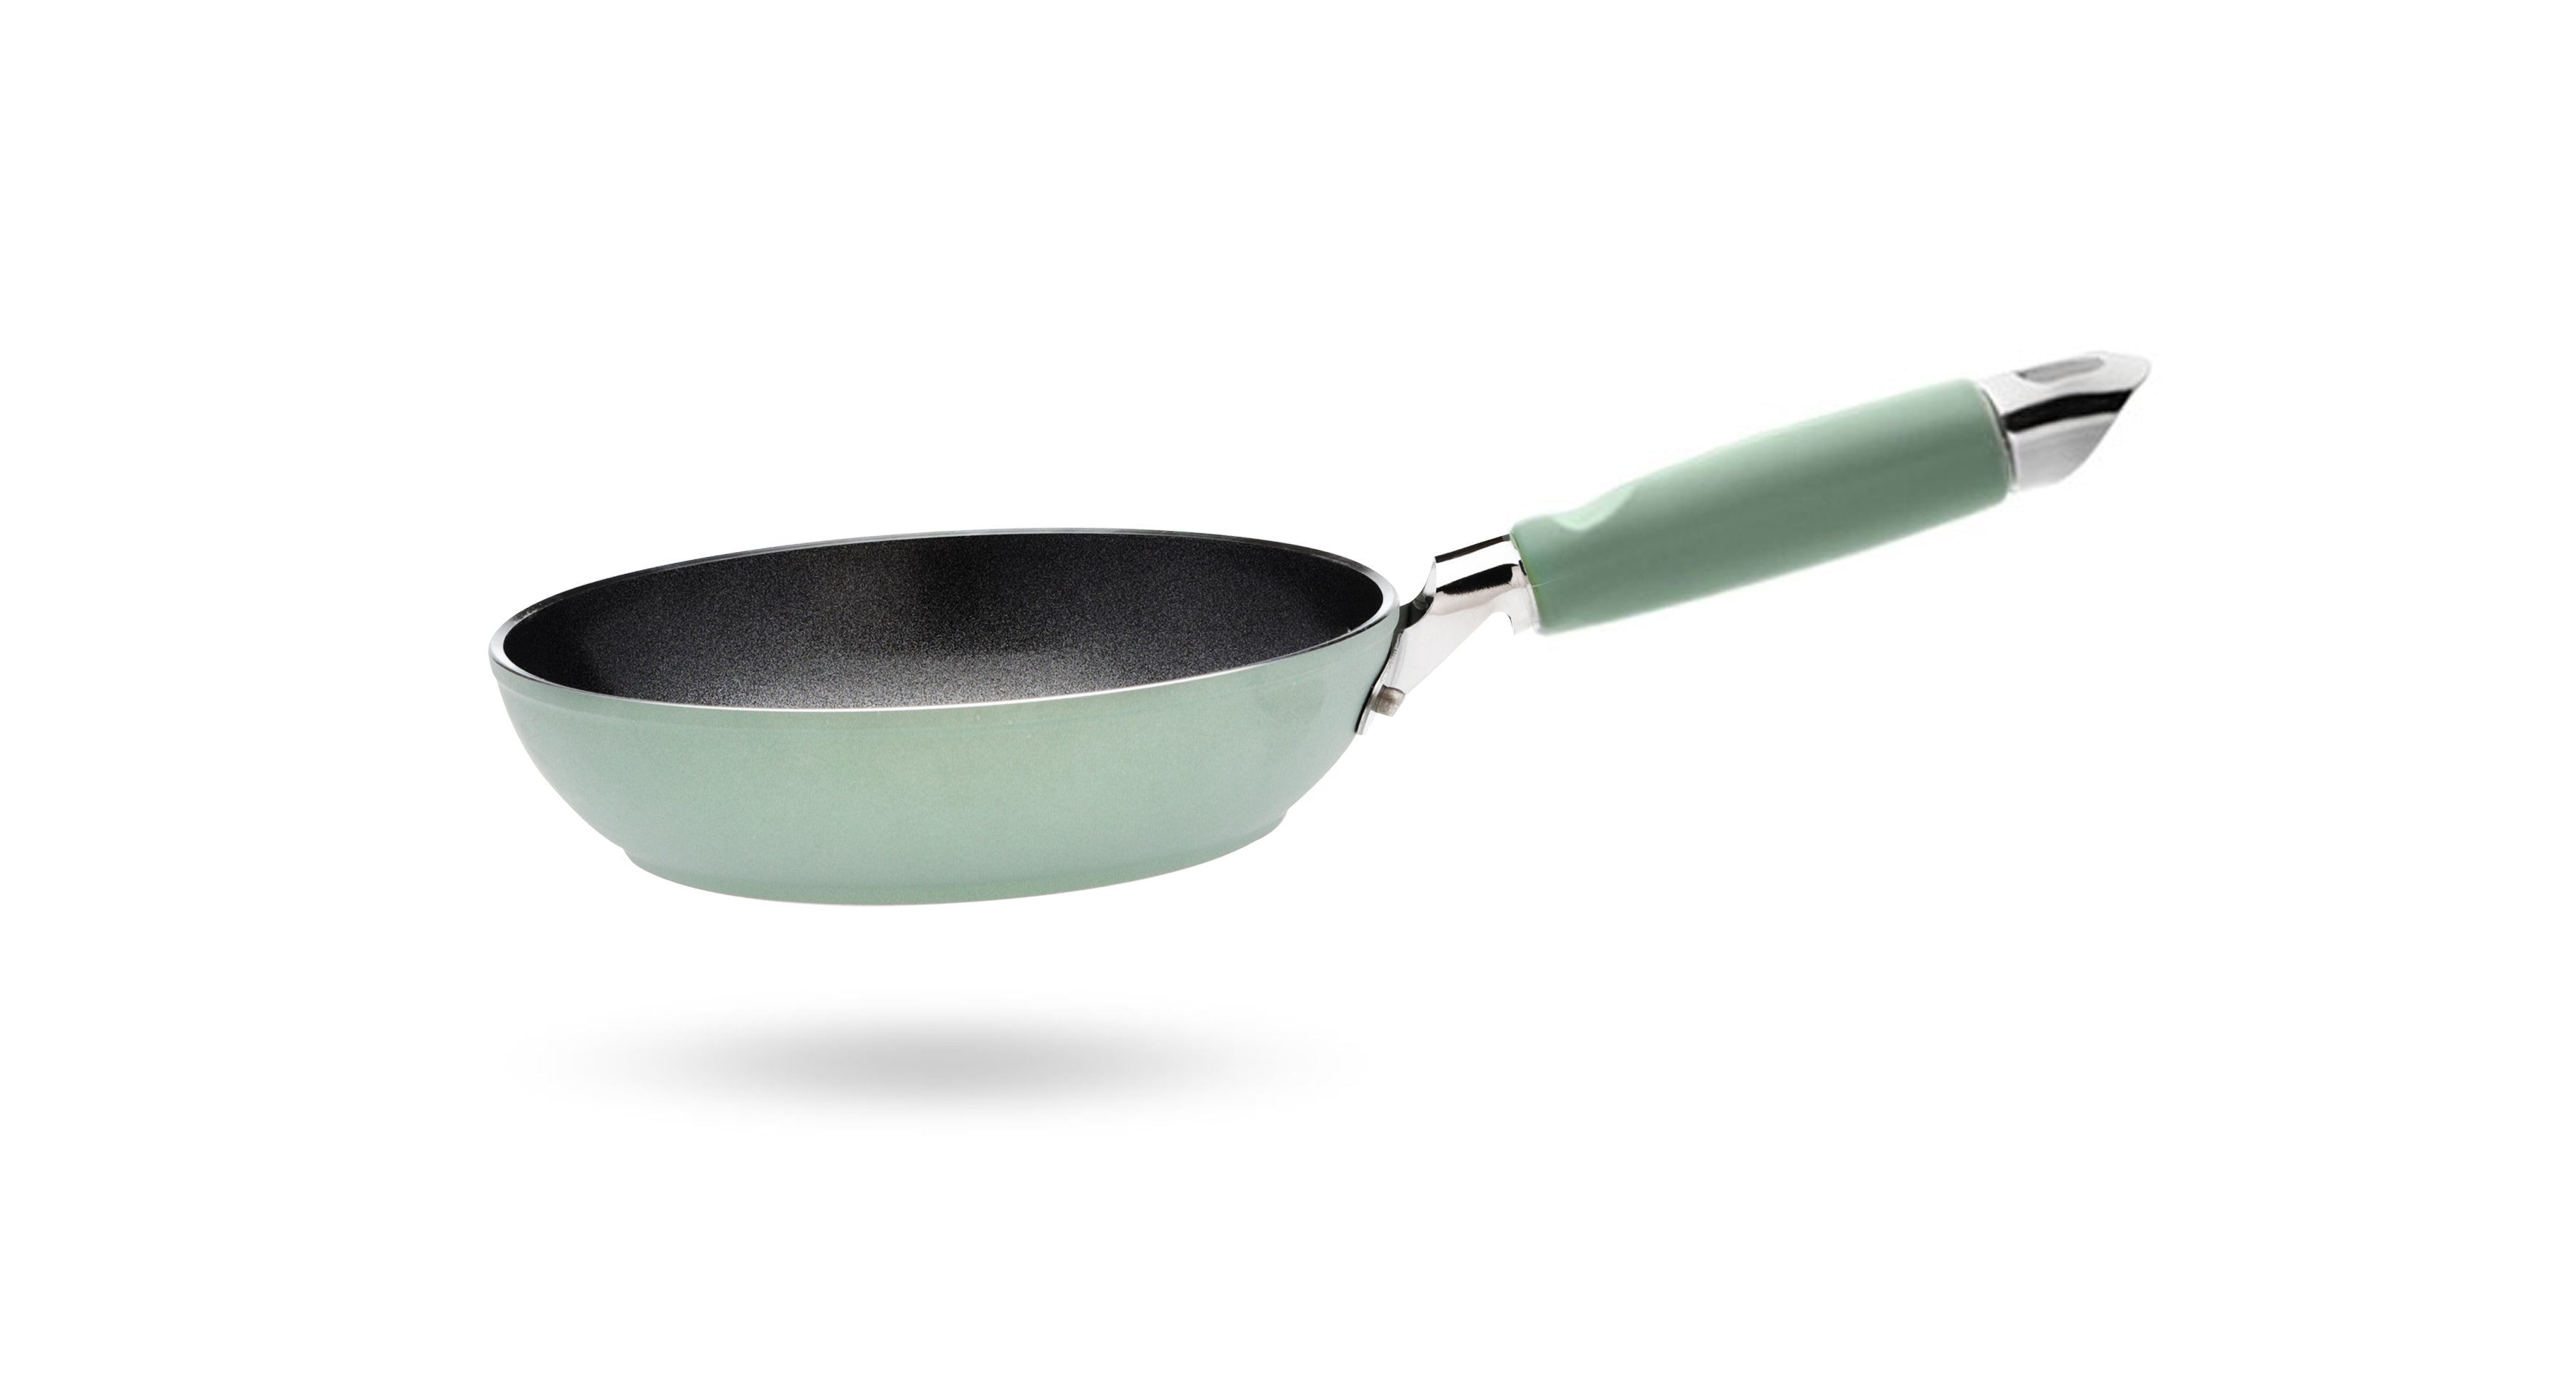 Nonstick Frying Pan 8 inch/9.5 inch/11 inch Skillet, Cooking Pan